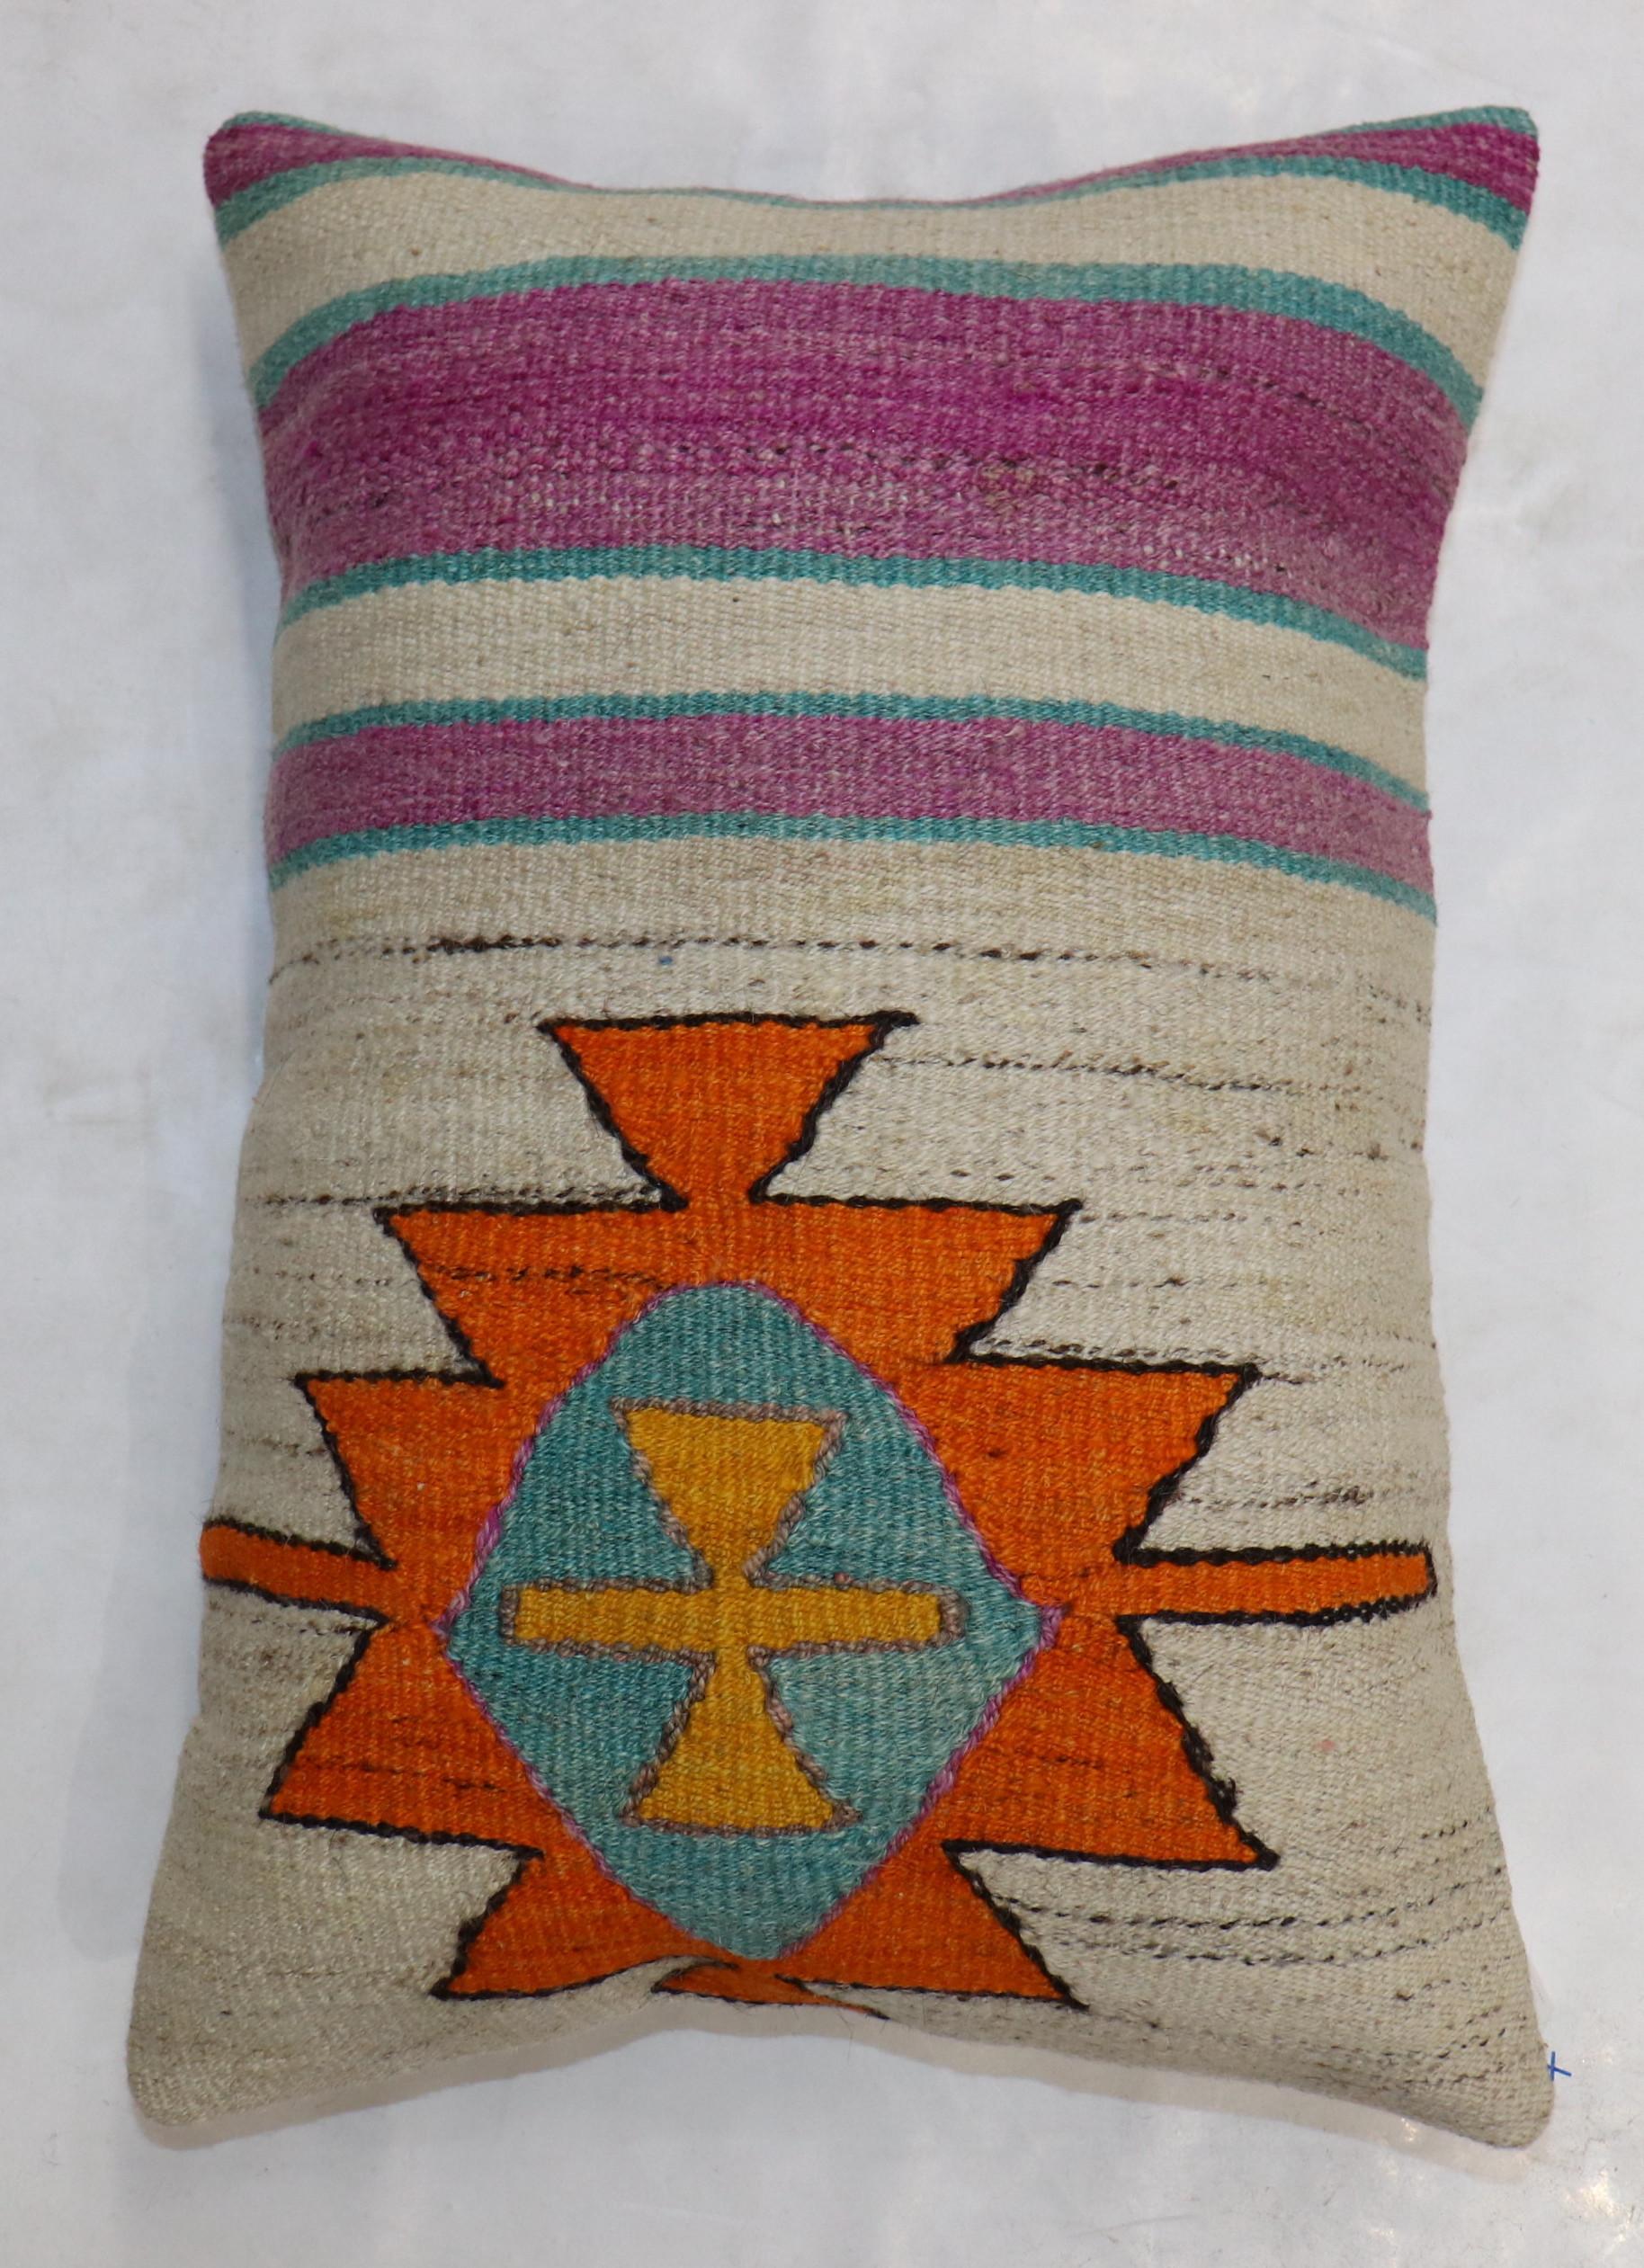 Pillow made from modern Turkish Kilim in white with a medallion in orange. Zipper closure and poly-fill insert provided.

Measures: 16